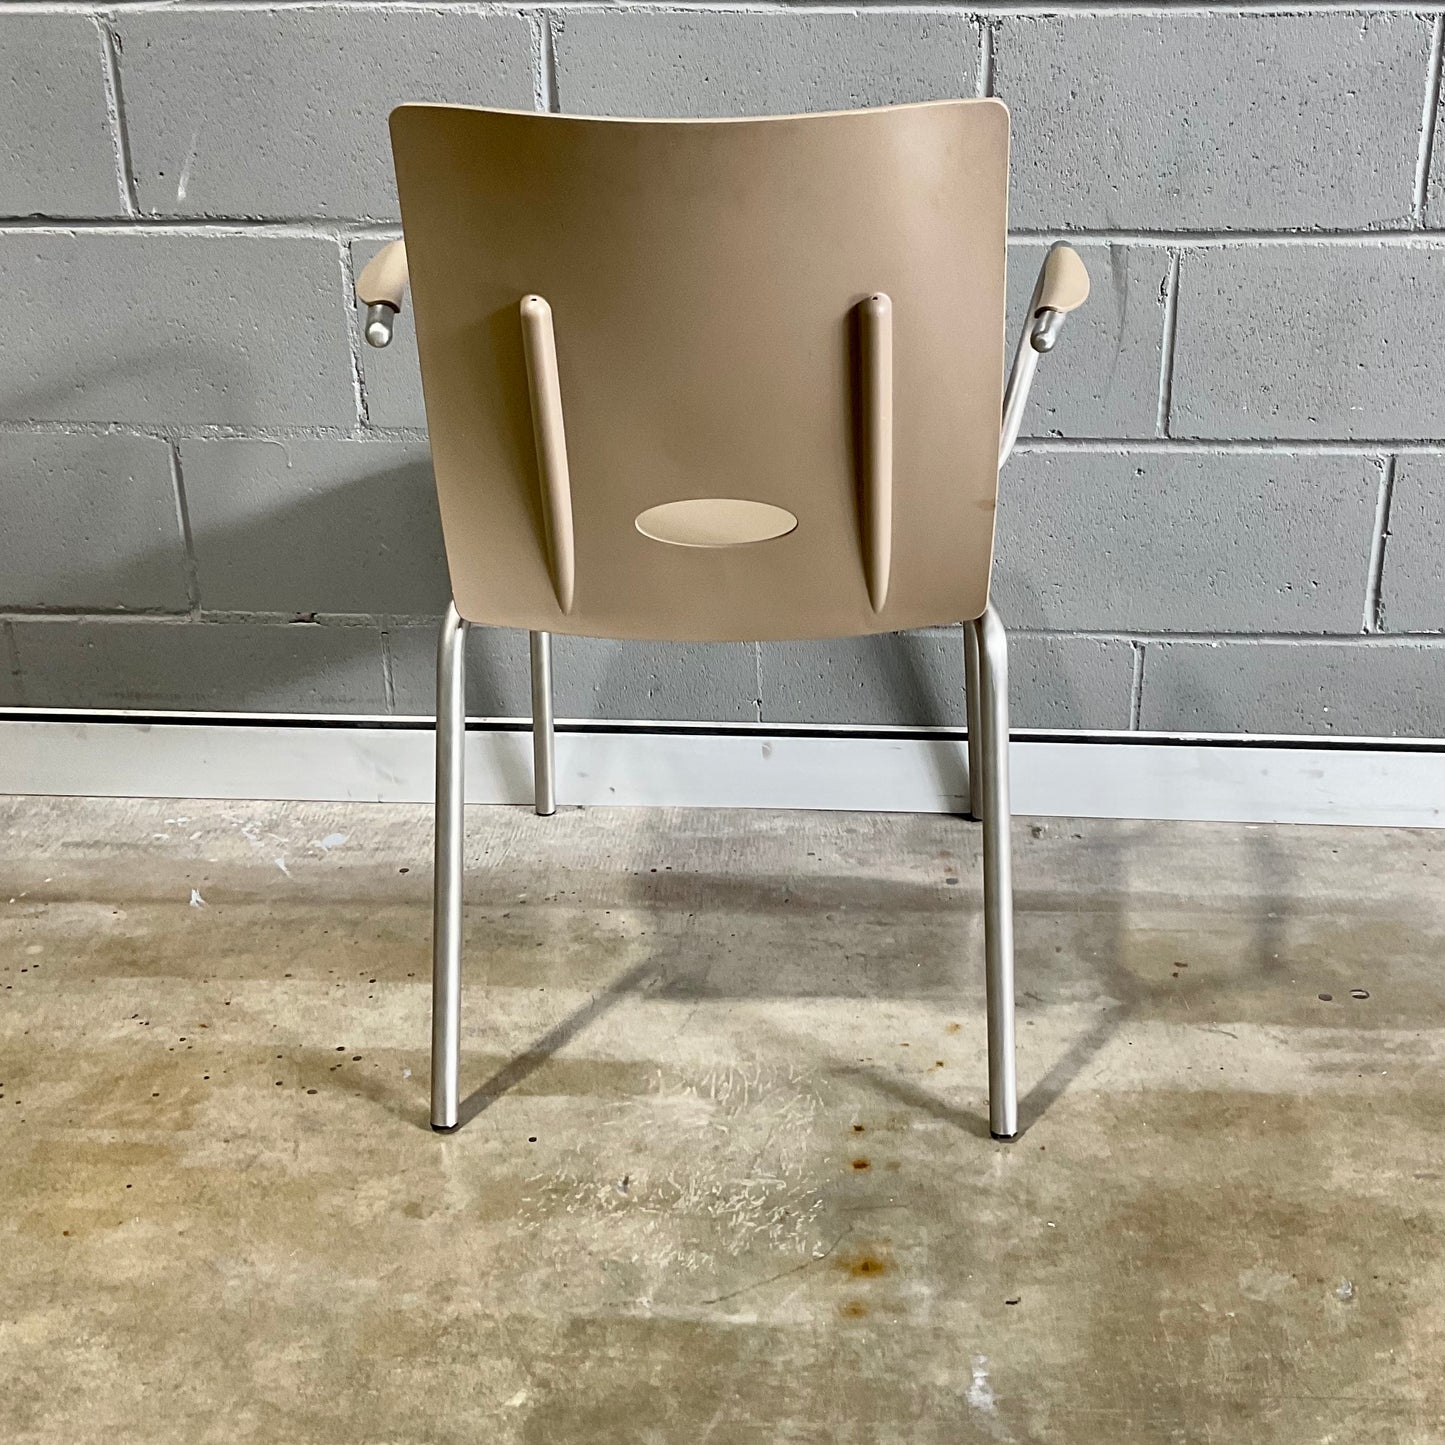 Load image into Gallery viewer, Set of FOUR Viola Chairs by Casprini (multiple sets available)
